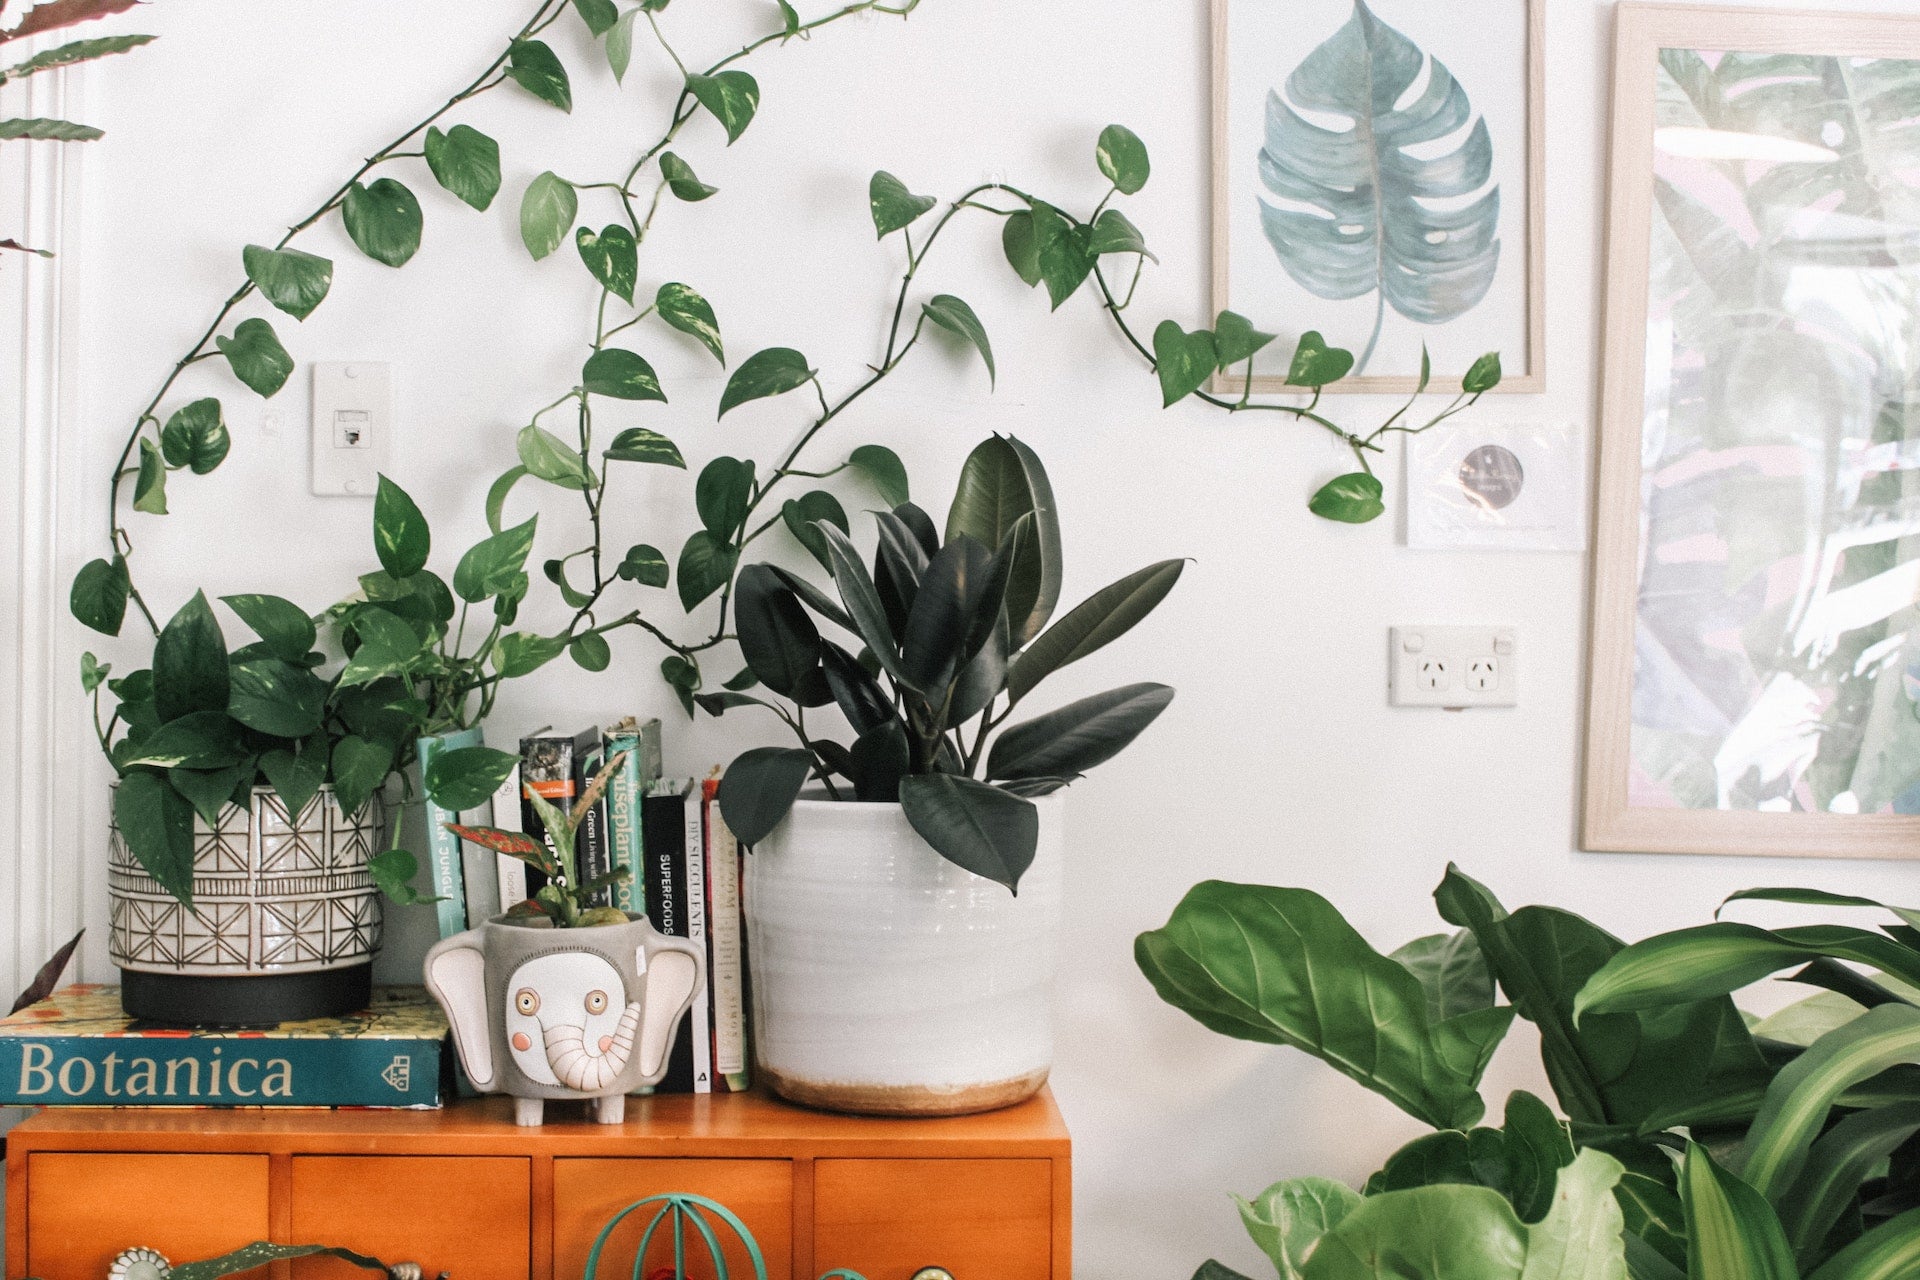 How to choose house plants